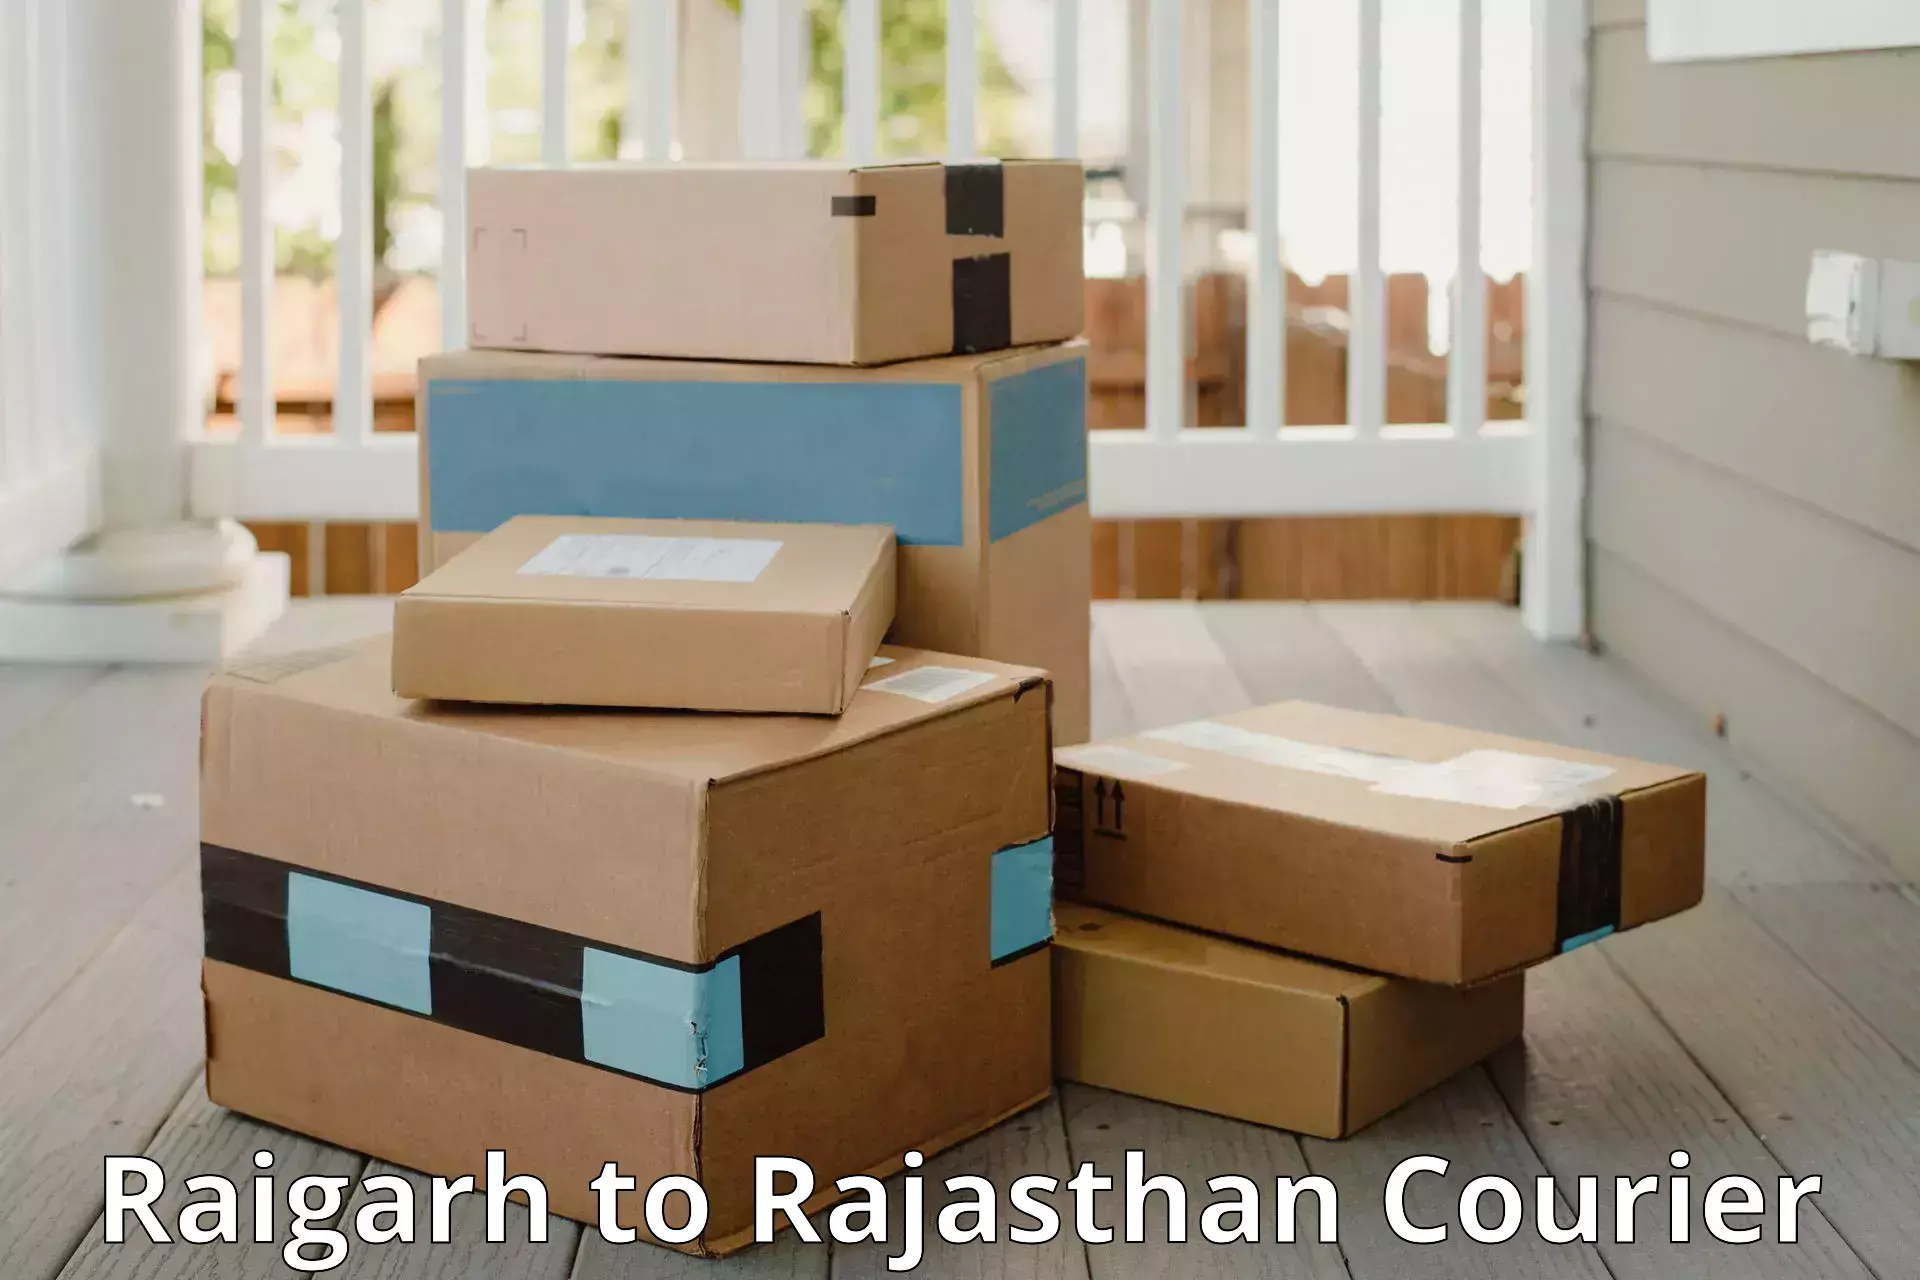 Instant baggage transport quote Raigarh to Udaipur